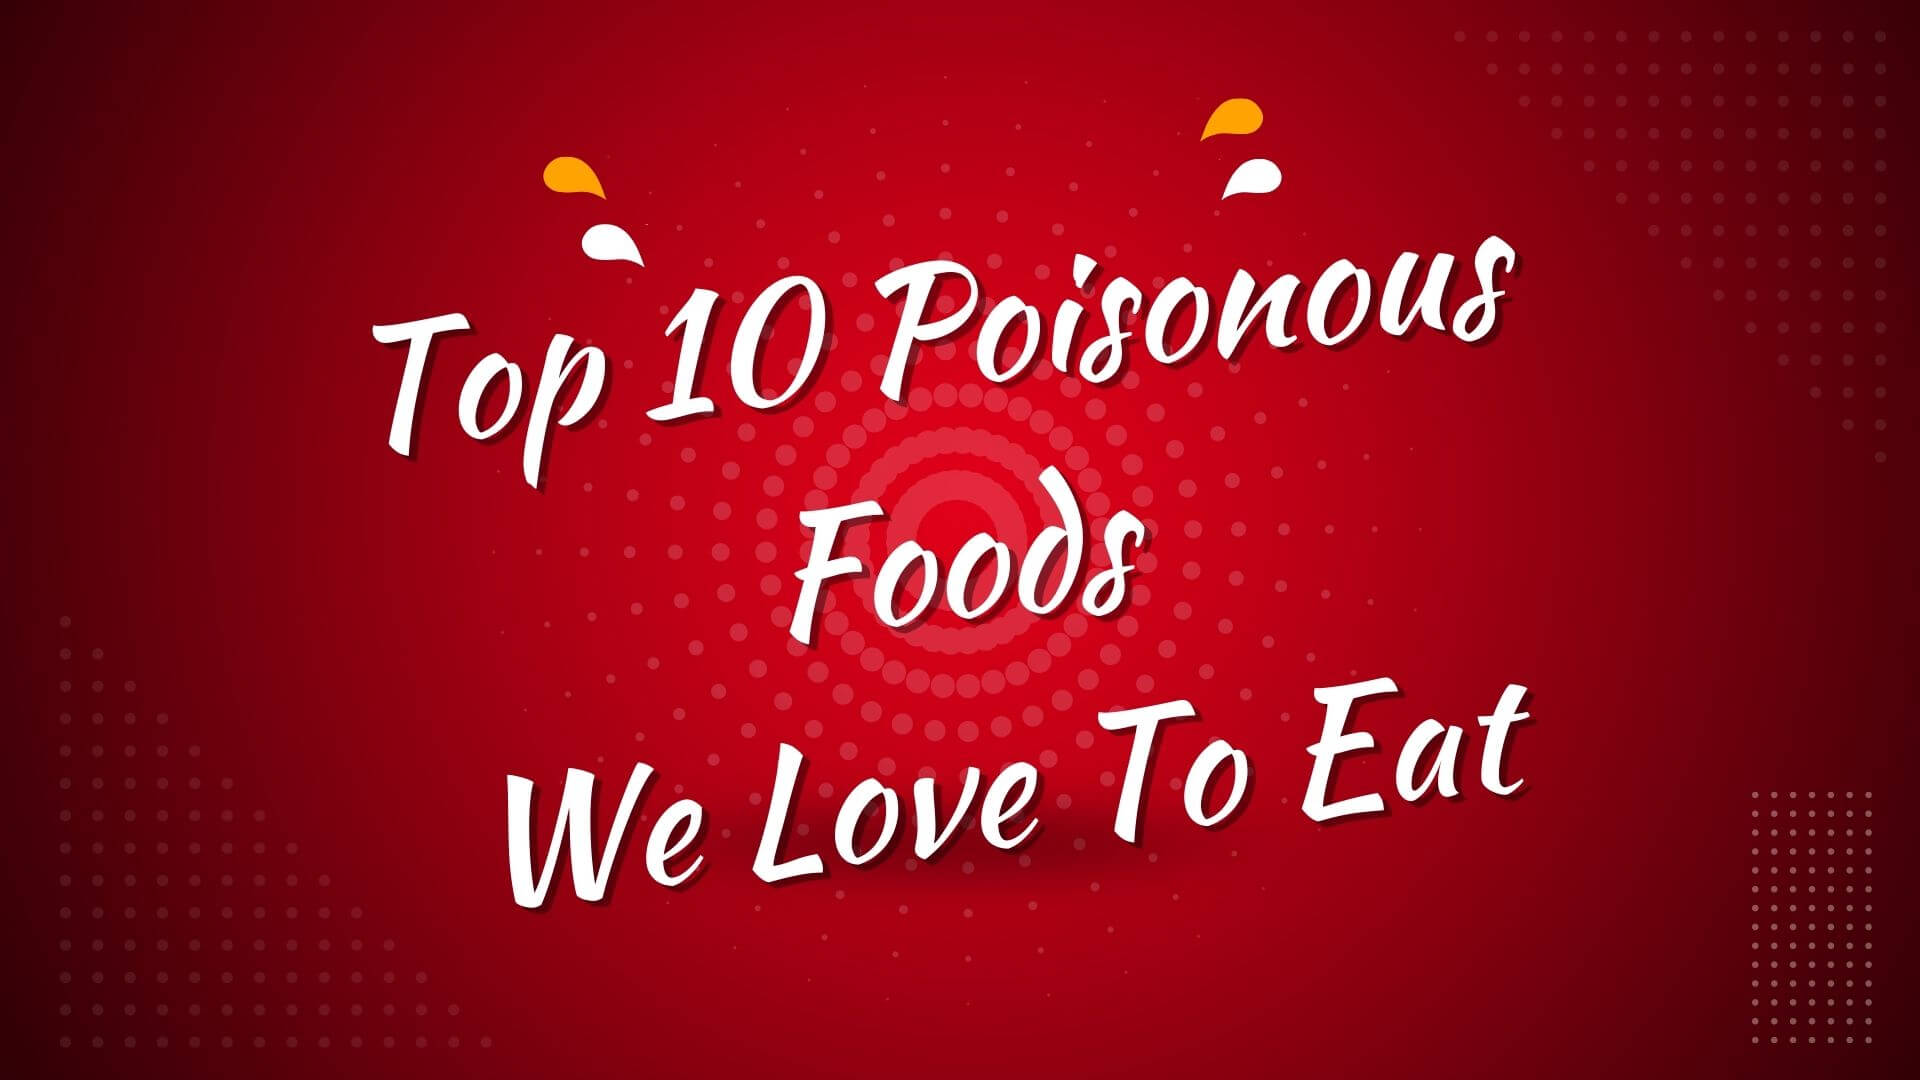 Top-10-Poisonous-Foods-We-Love-To-Eat